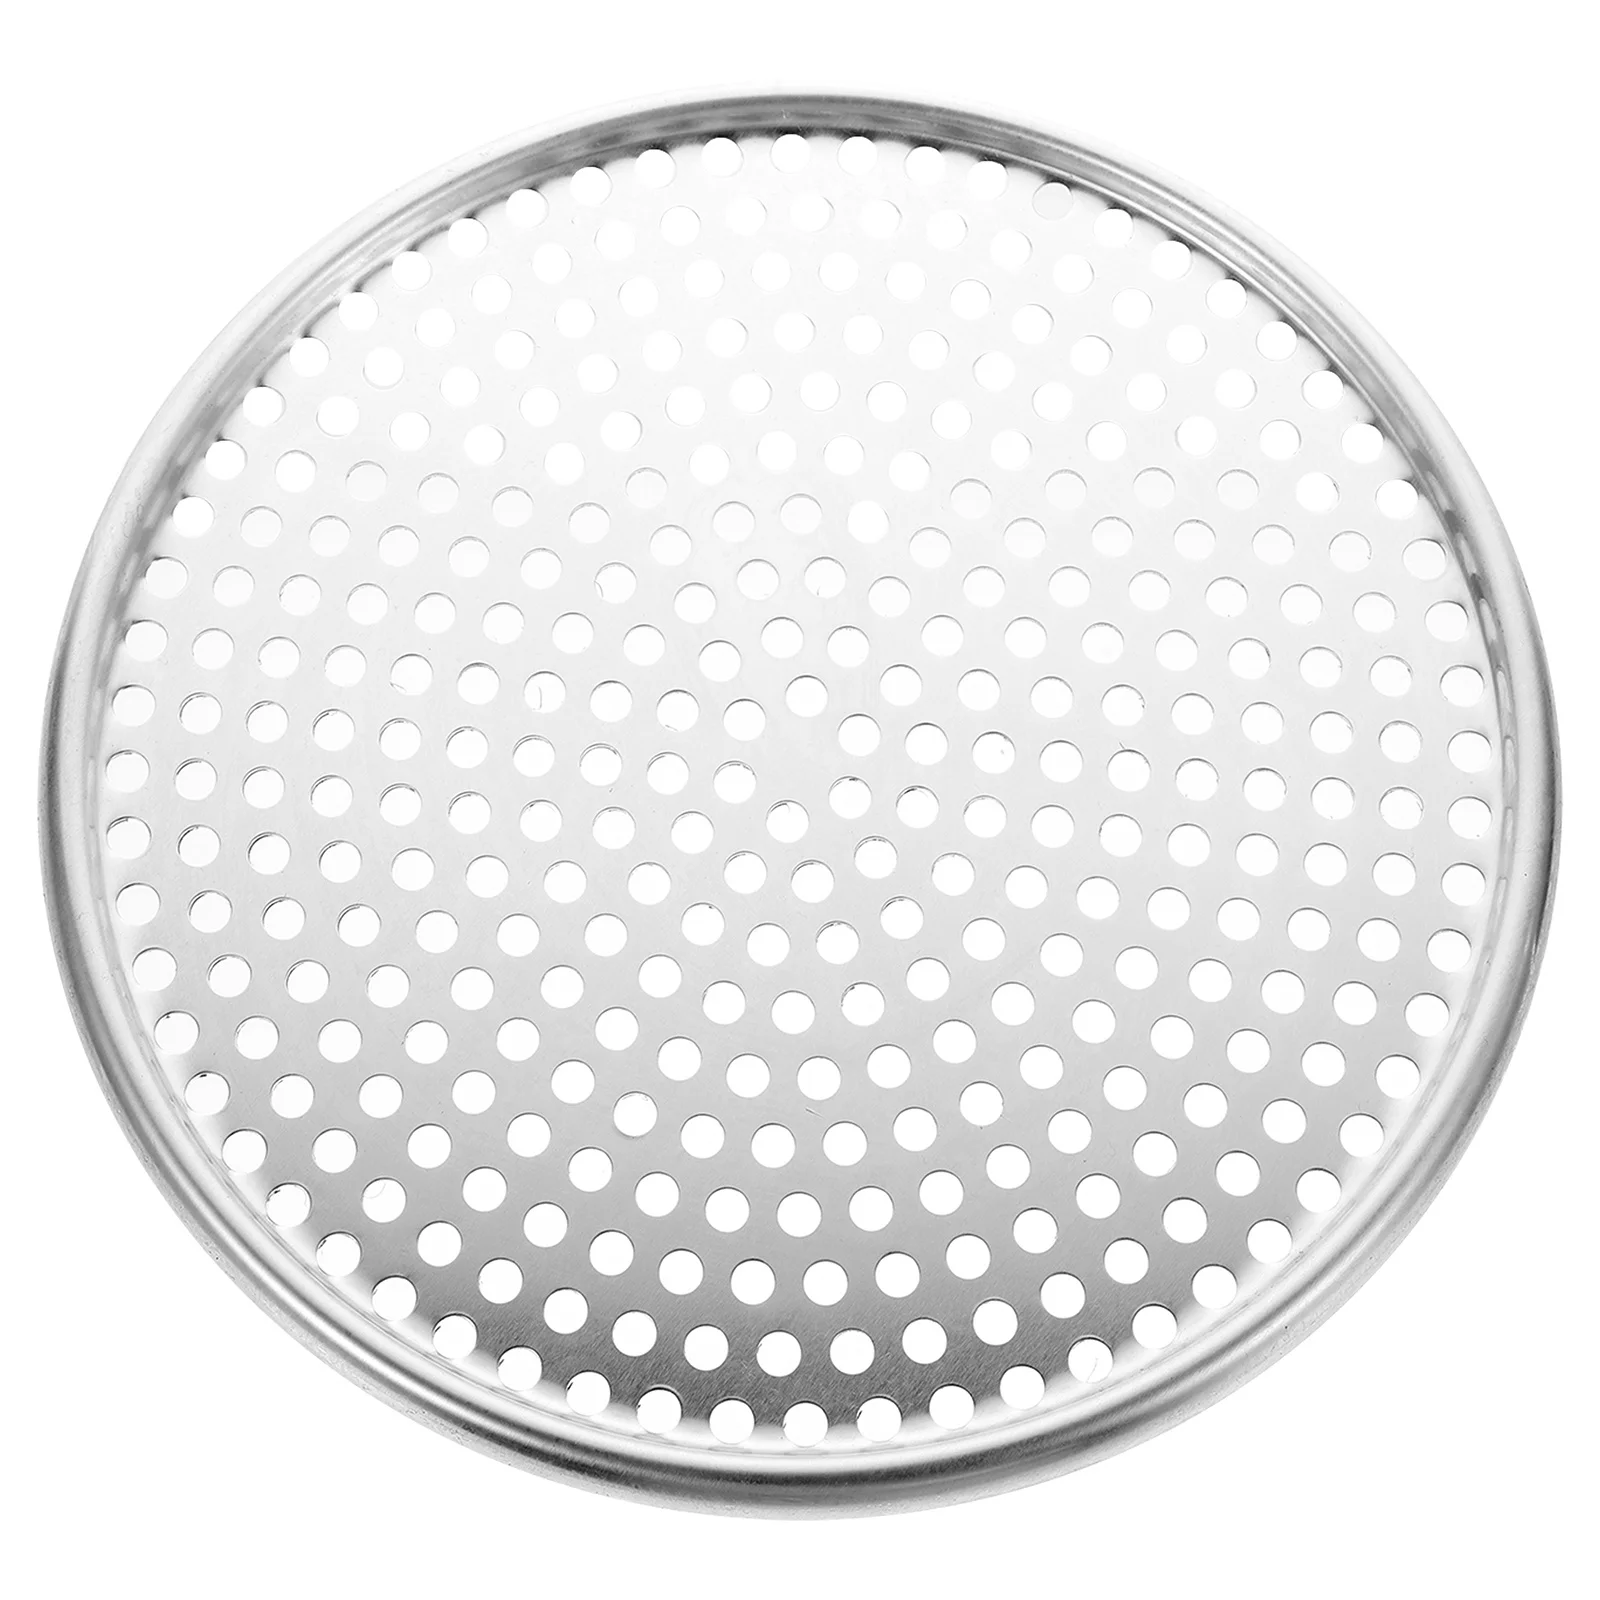 

Pizza Pan Tray Baking Plate Oven Pans Inch Round Screen Pie Stick Non Roasting Net Sheet Bread Mesh Vented Bakeware Metal Steel